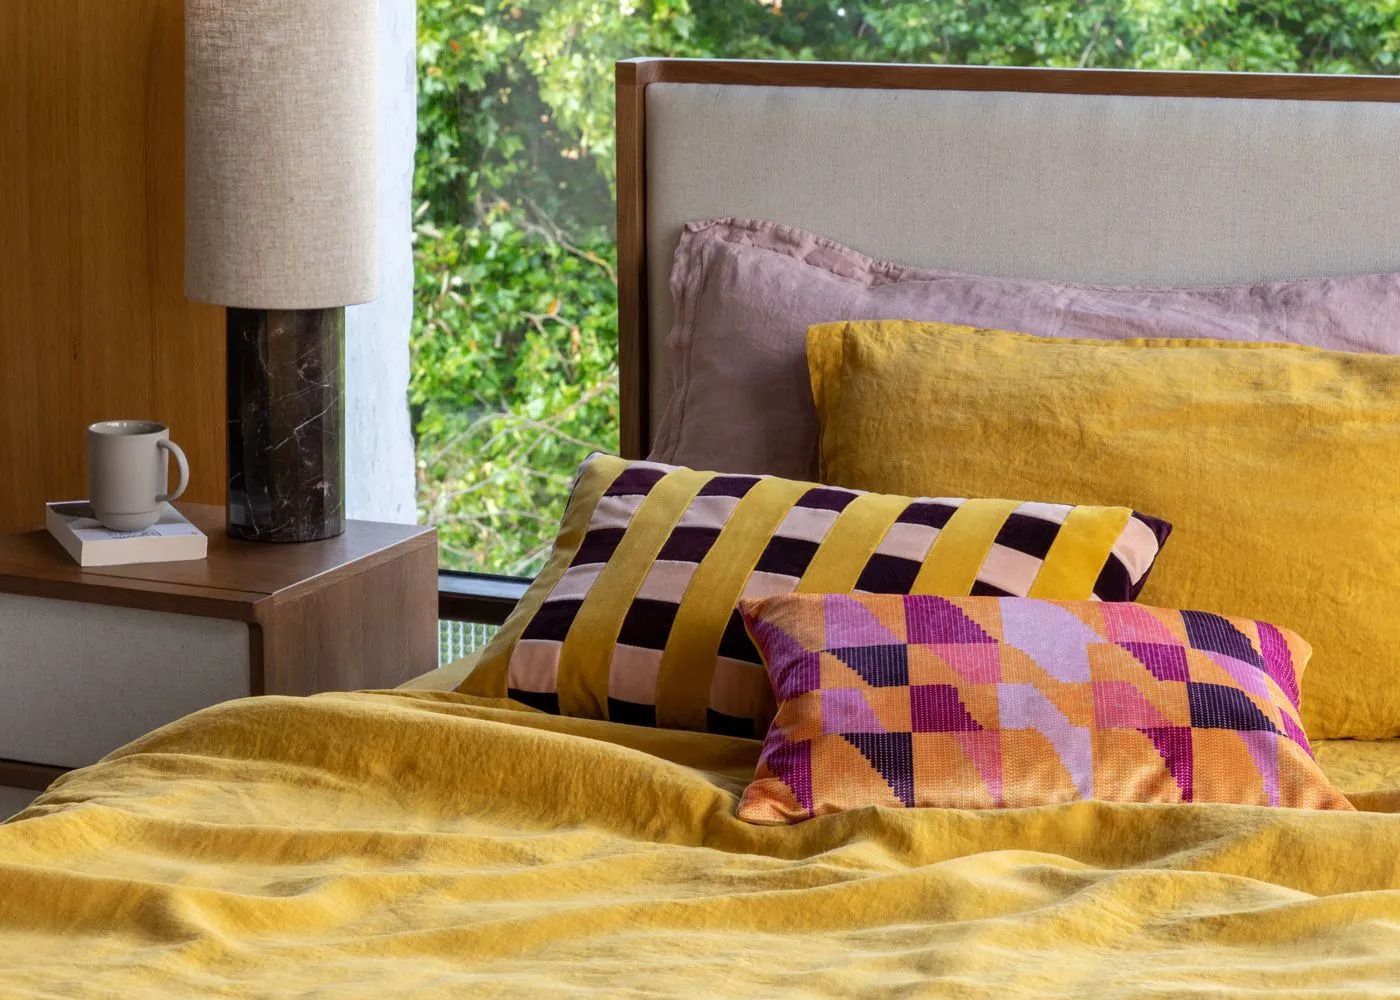 Supreme Pillow Shams to Match Any Bedroom's Decor